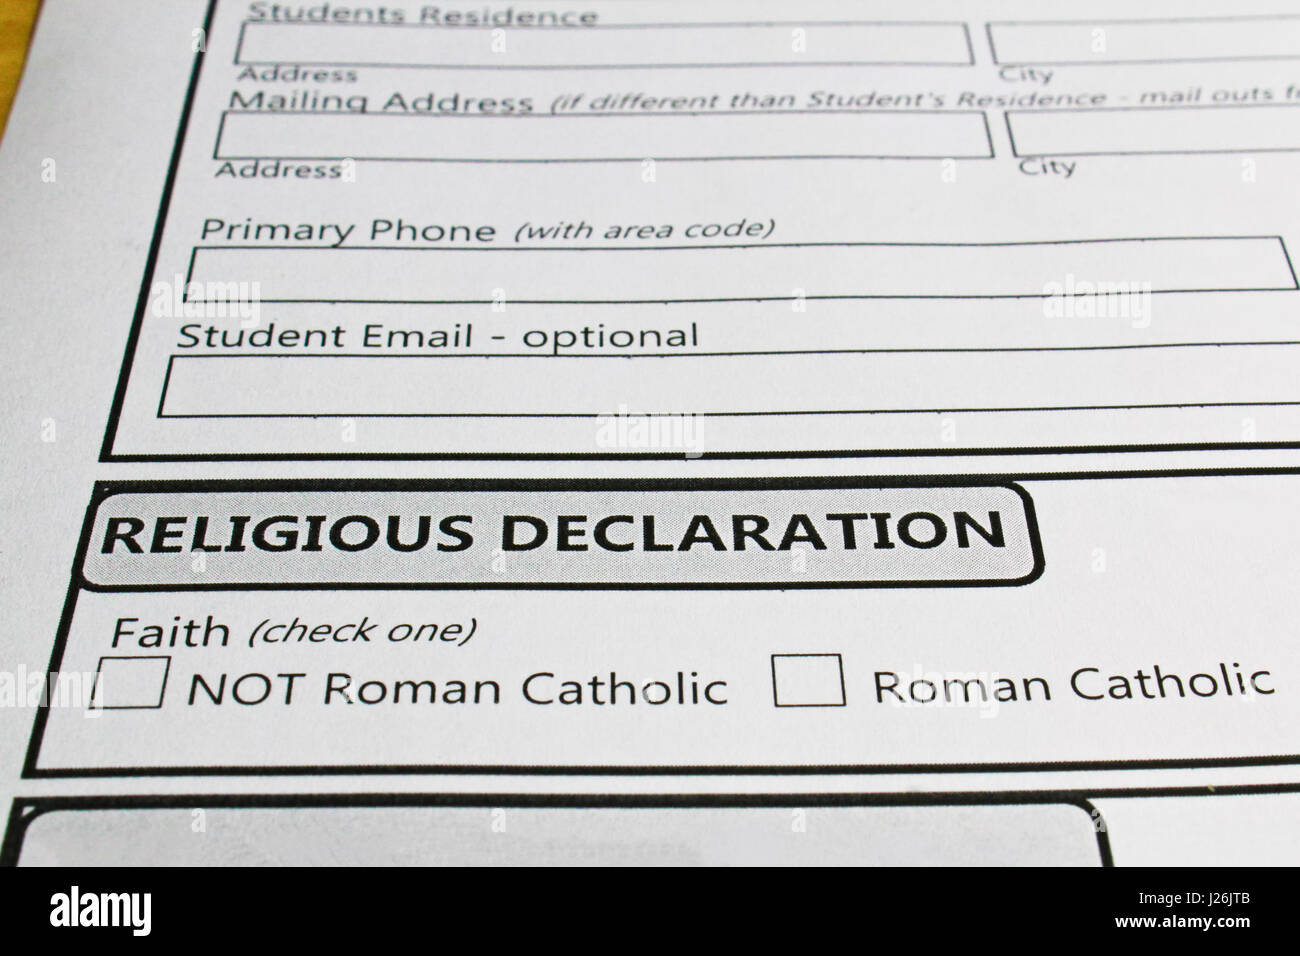 Declaring ones faith in order to attend a catholic school. Stock Photo